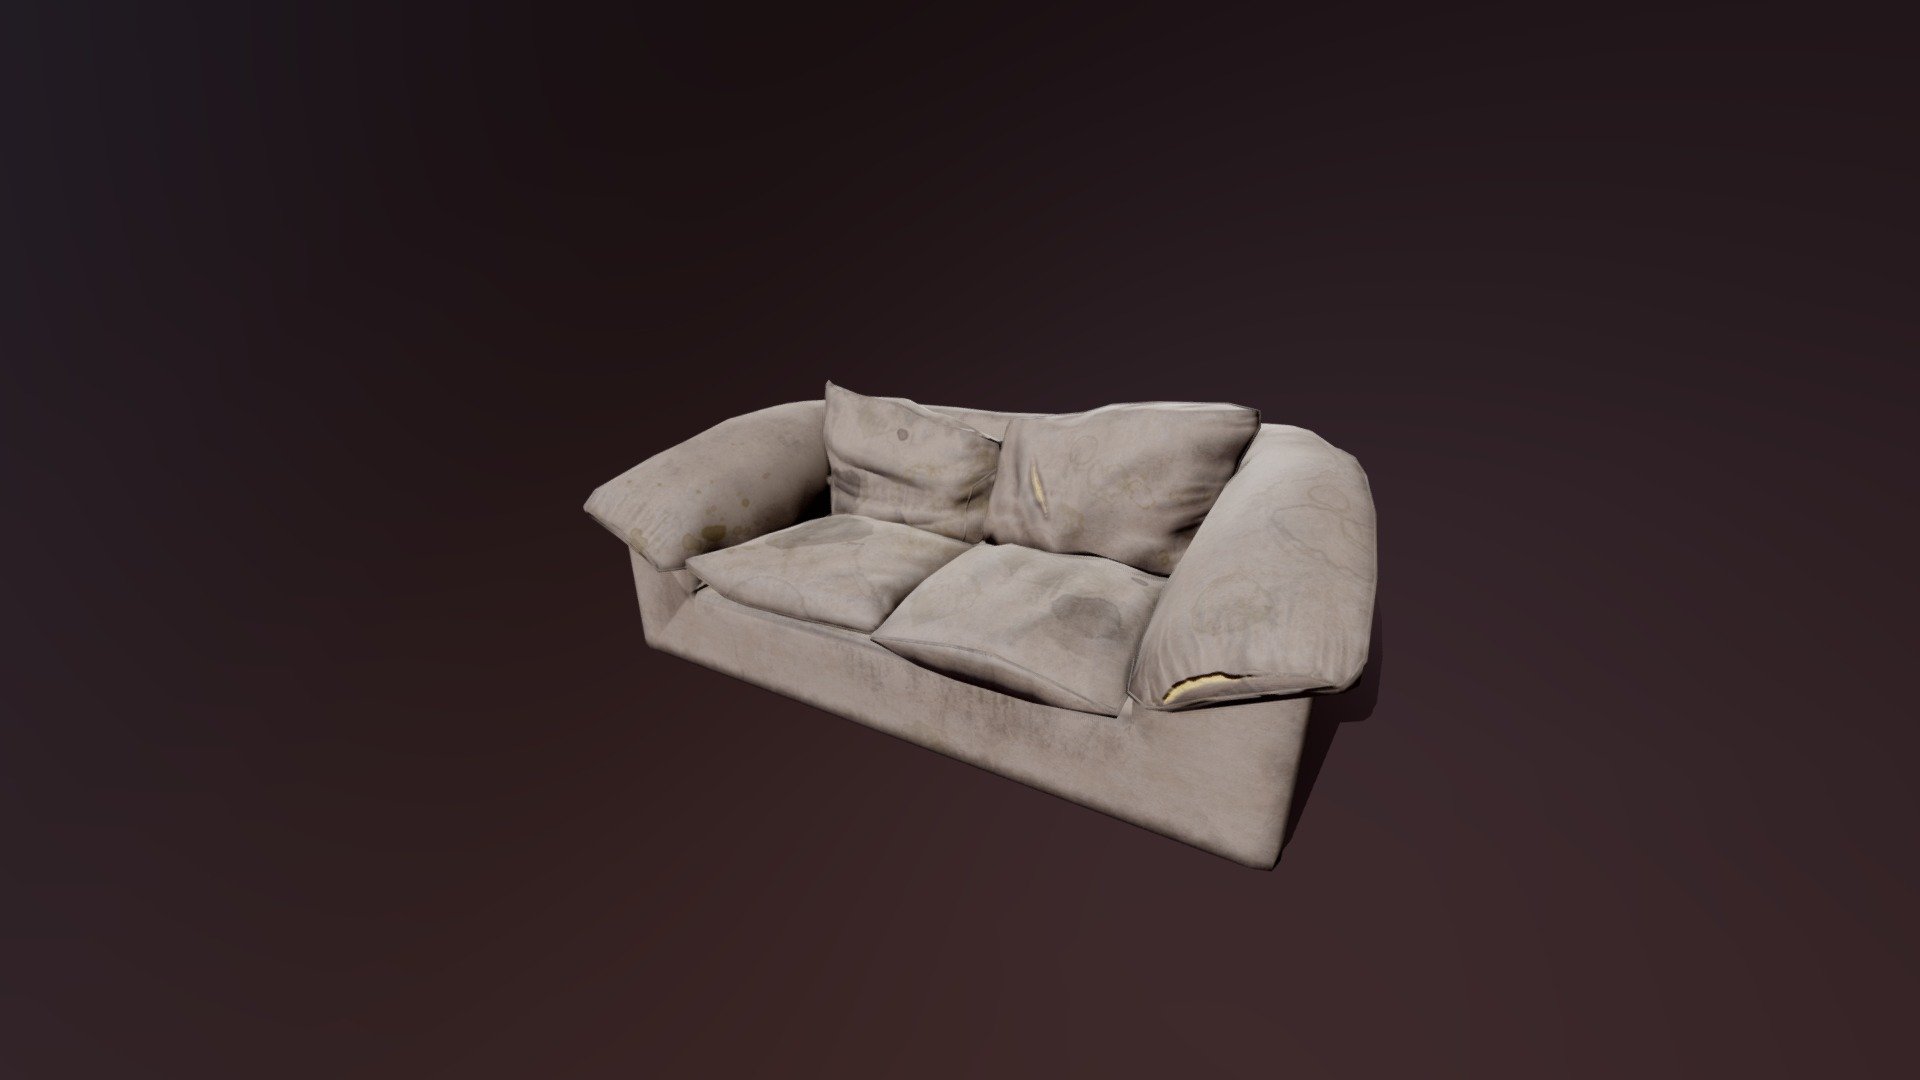 Old couch as part of a set of alley props for upcoming title Cold Comfort by Gamma Minus

http://coldcomfortgame.com/

Full kit on Artstation
https://www.artstation.com/artwork/xz3Nxr - Used Couch - 3D model by Ryan Kohr (@kohr_ryan) 3d model